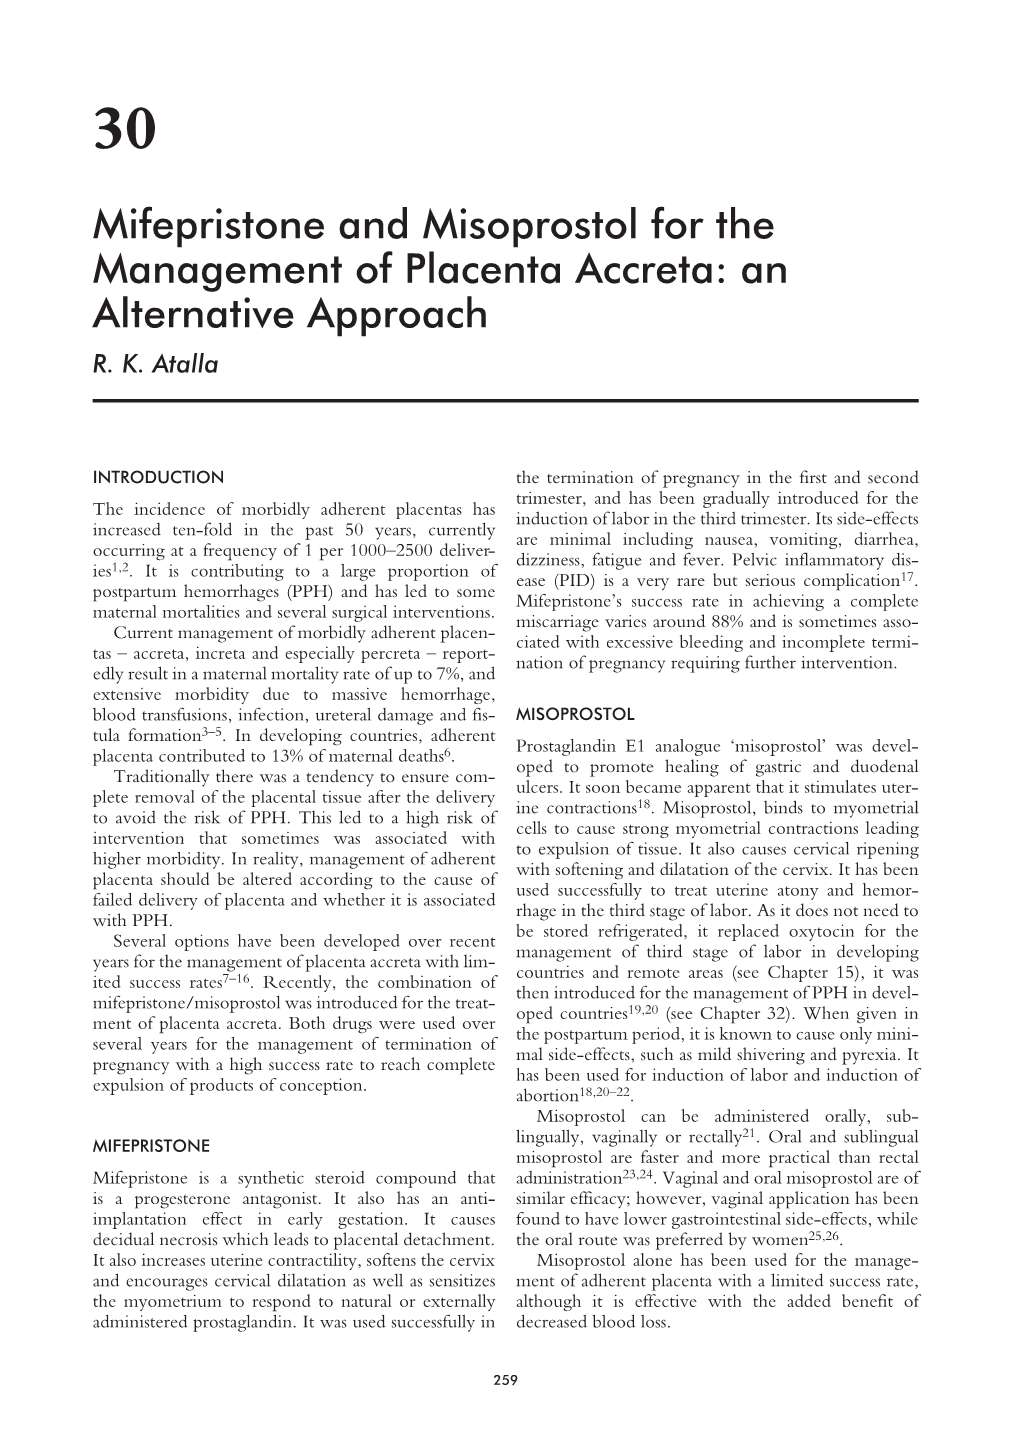 Mifepristone and Misoprostol for the Management of Placenta Accreta: an Alternative Approach R